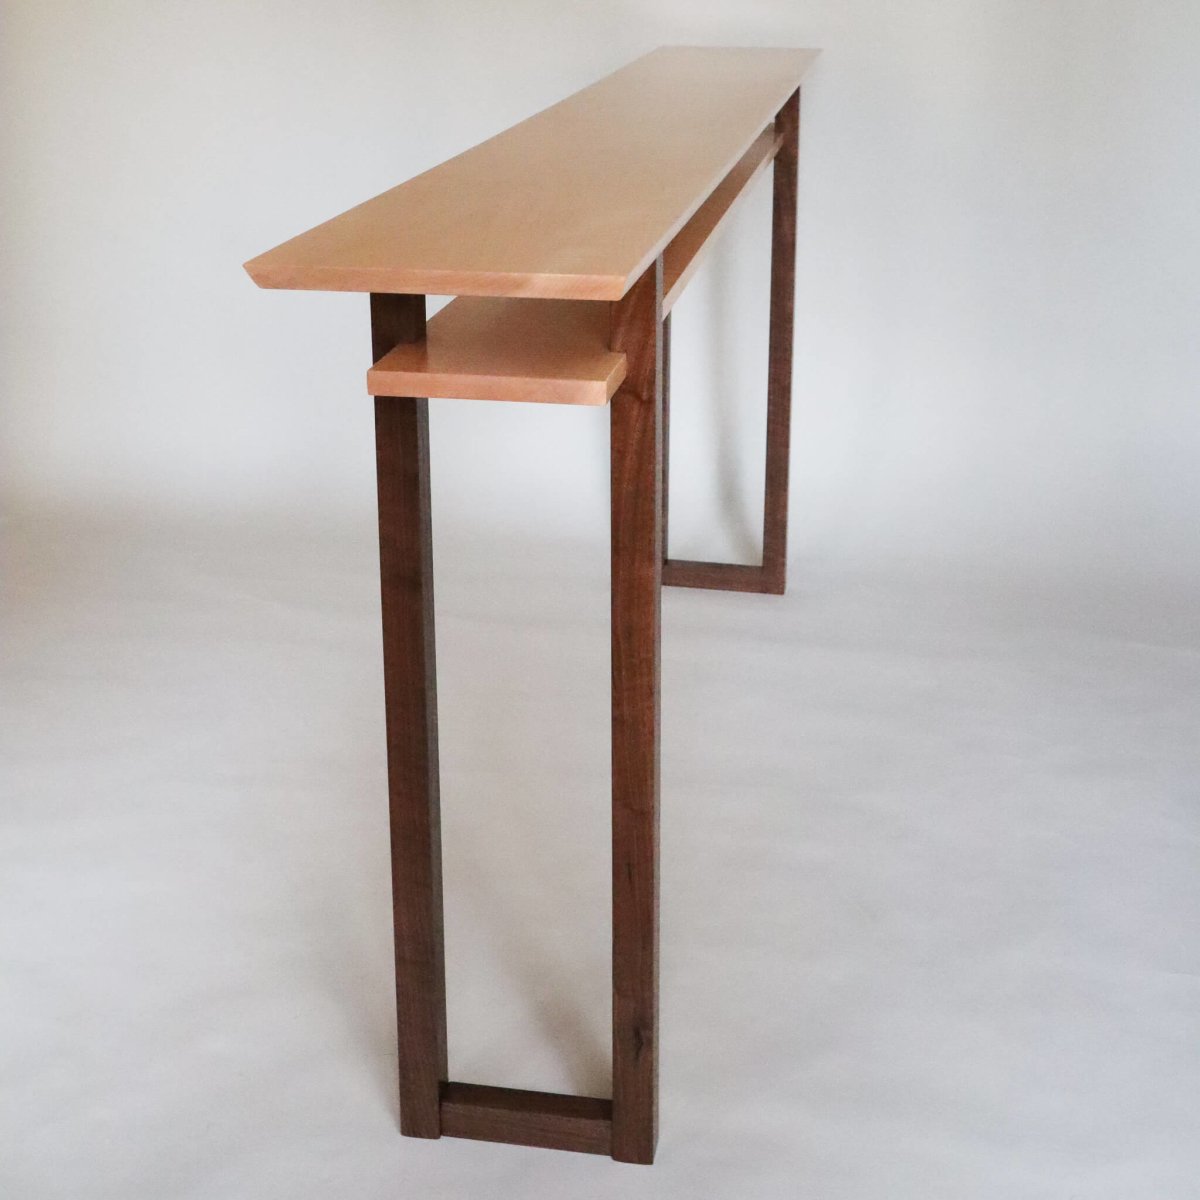 A long narrow table for entryways, this tiger maple and walnut console table is hand-crafted from premium wood and features lovely craftsmanship details.  Fine furniture designs from Mokuzai Furniture